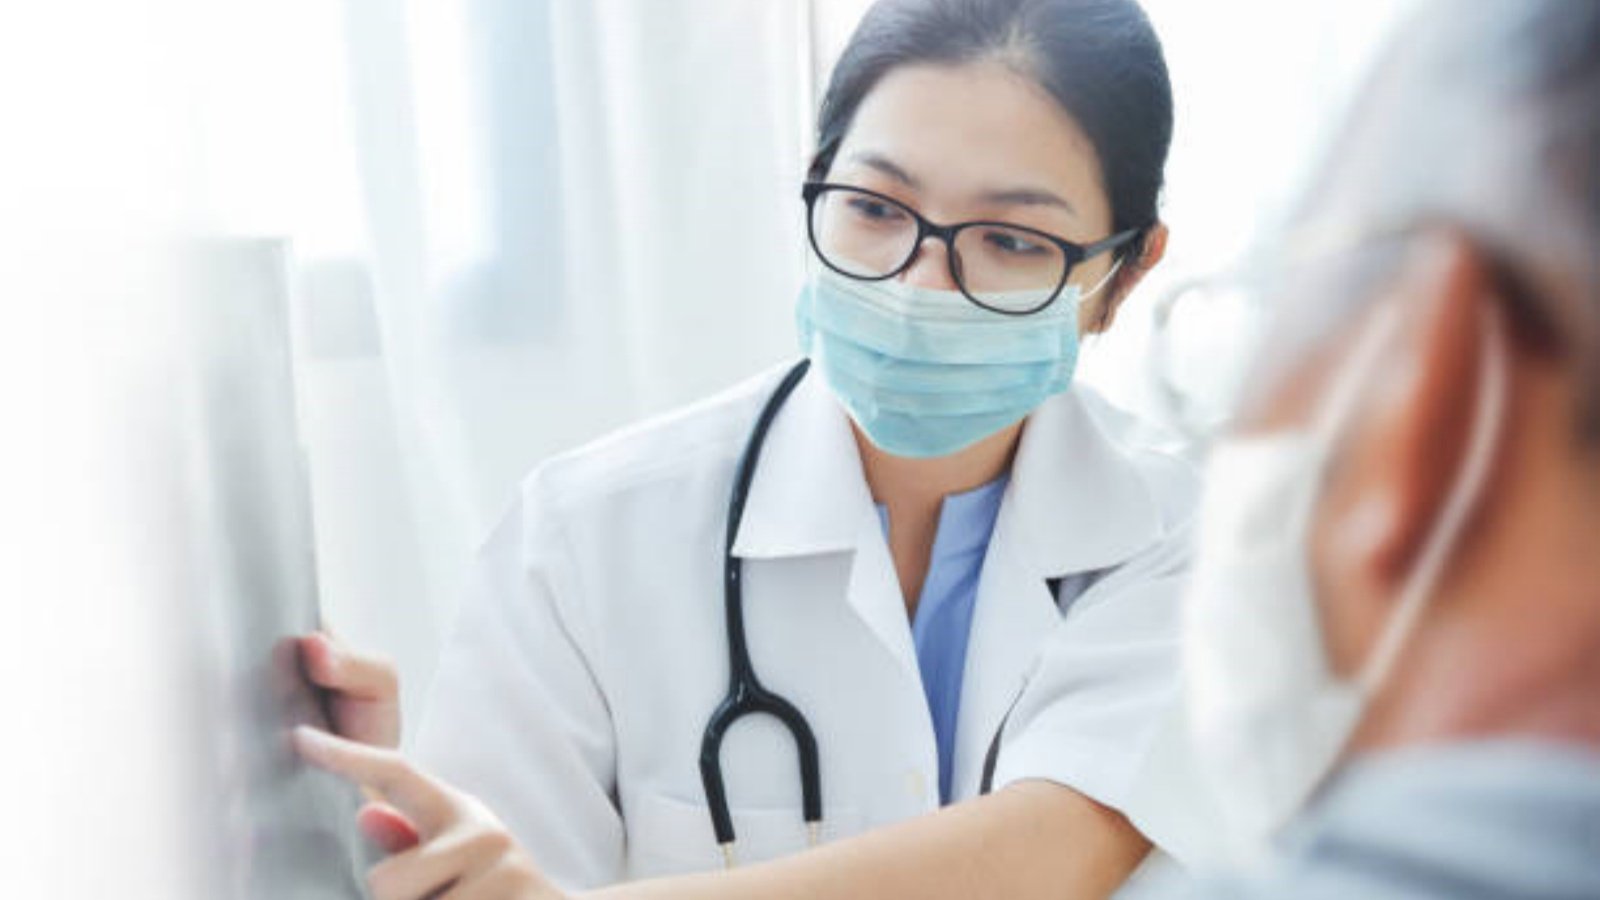 Medical Mask vs Surgical Mask: Which is More Effective?